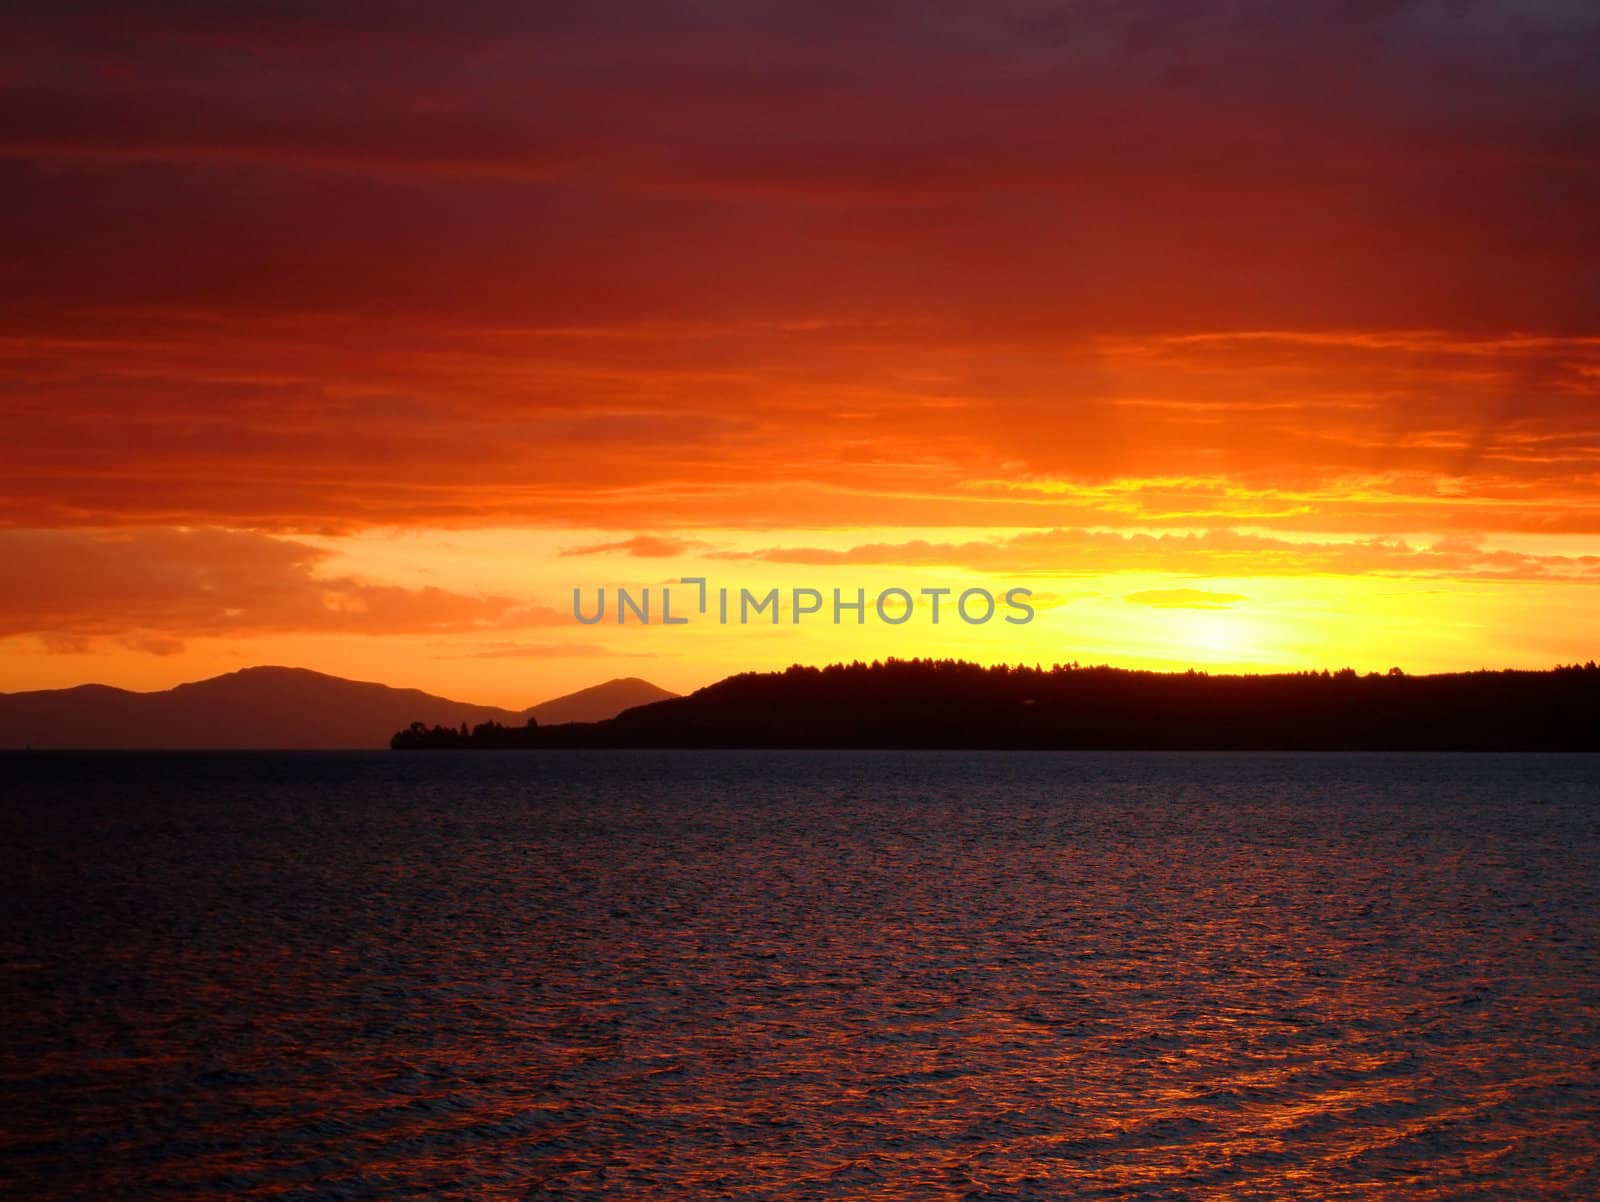 Deep red sunset over Lake Taupo (with volcanic peaks seen on the left horizon), New Zealand